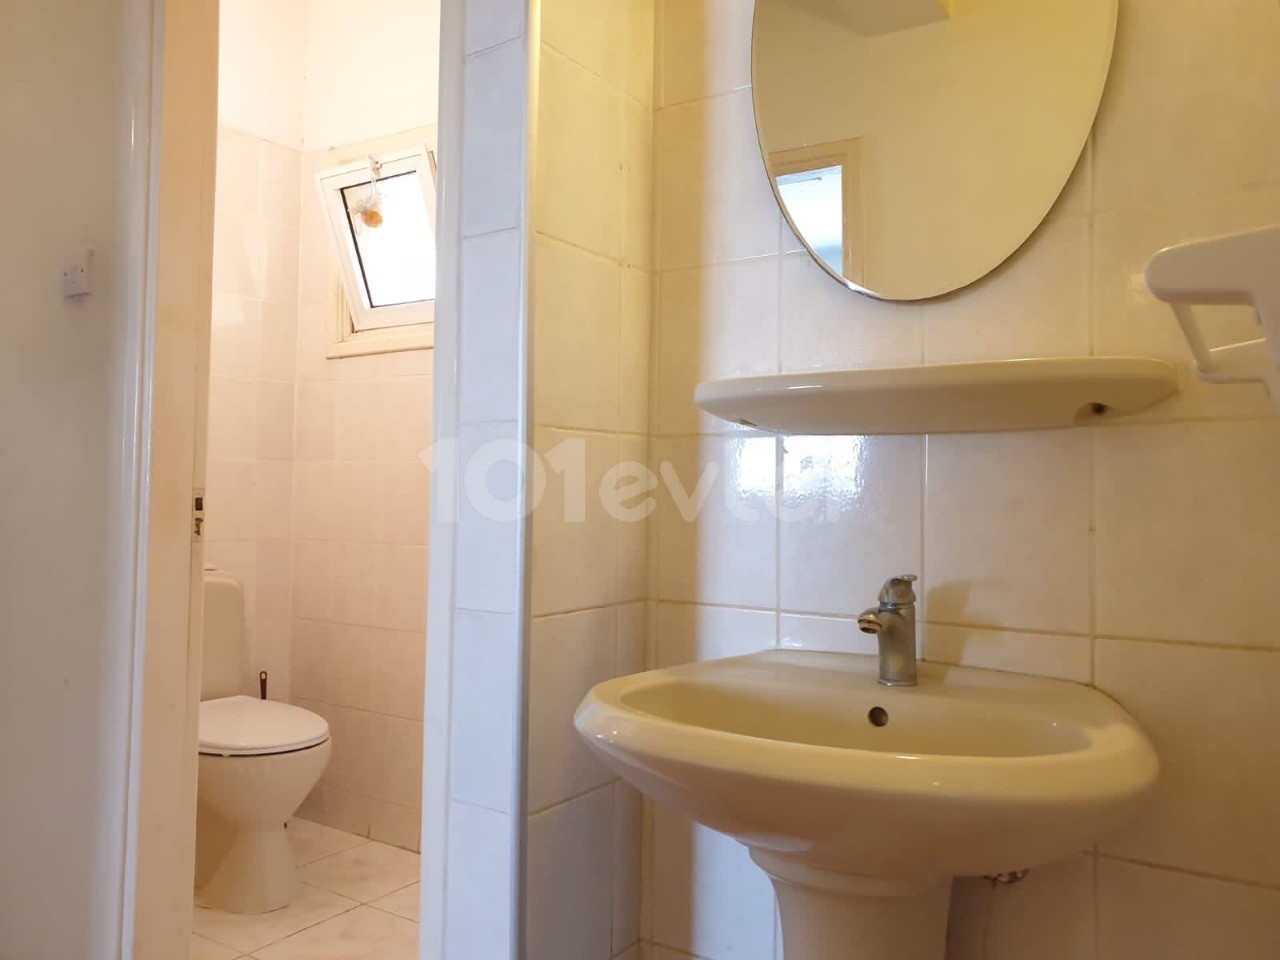 FULLY FURNISHED 3+1 FLAT FOR RENT IN FAMAGUSTA CENTER